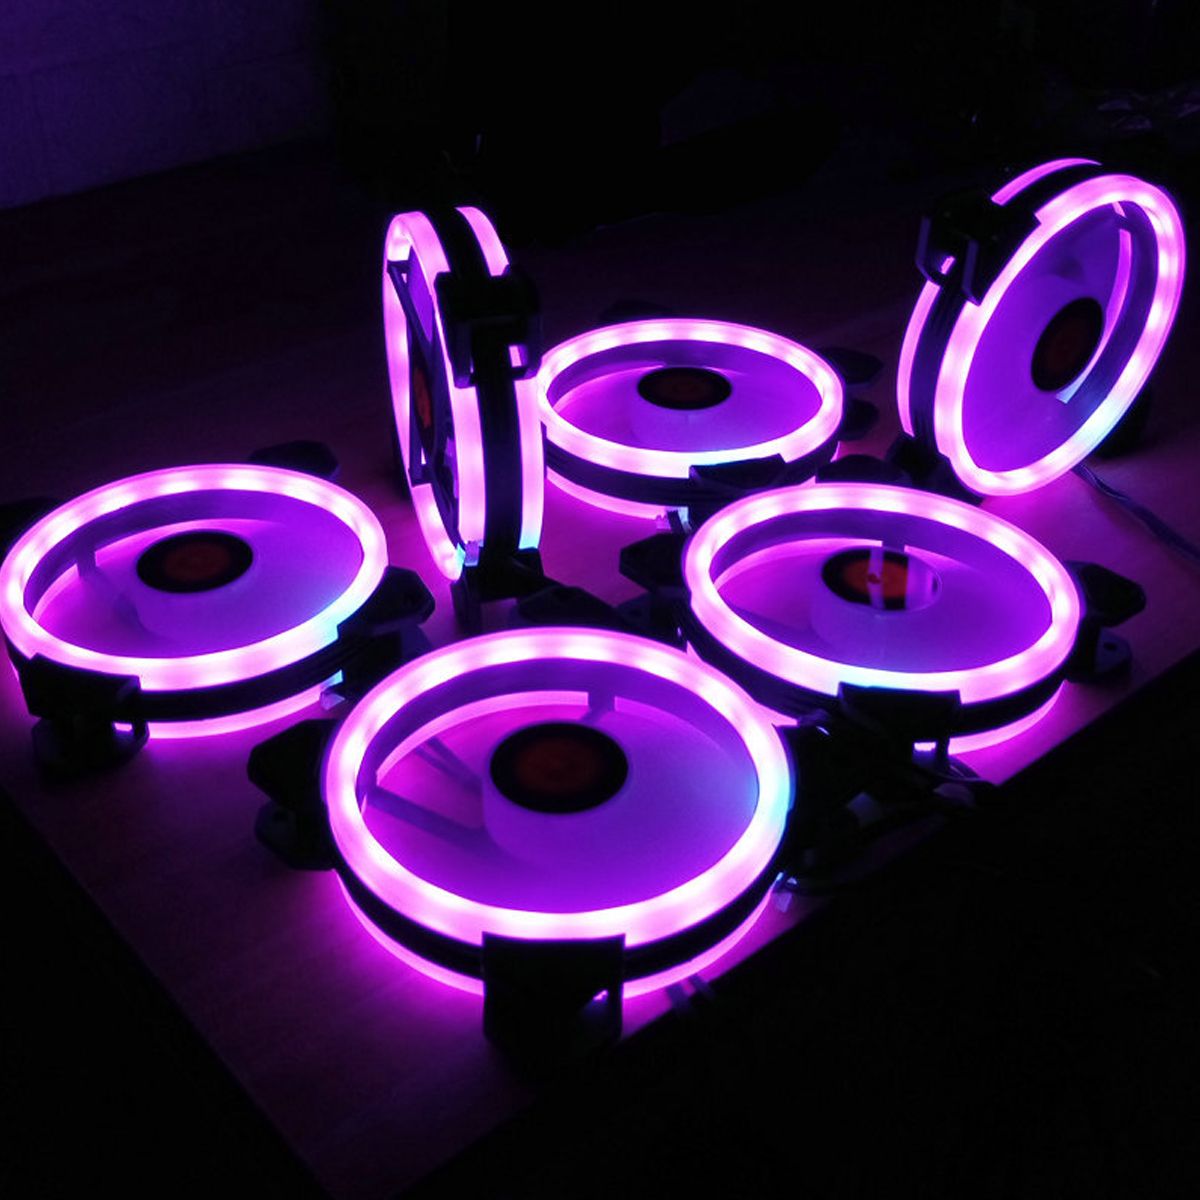 Coolmoon-6PCS-120mm-Adjustable-RGB-LED-Light-Computer-PC-Case-Cooling-Fan-with-Remote-1558132